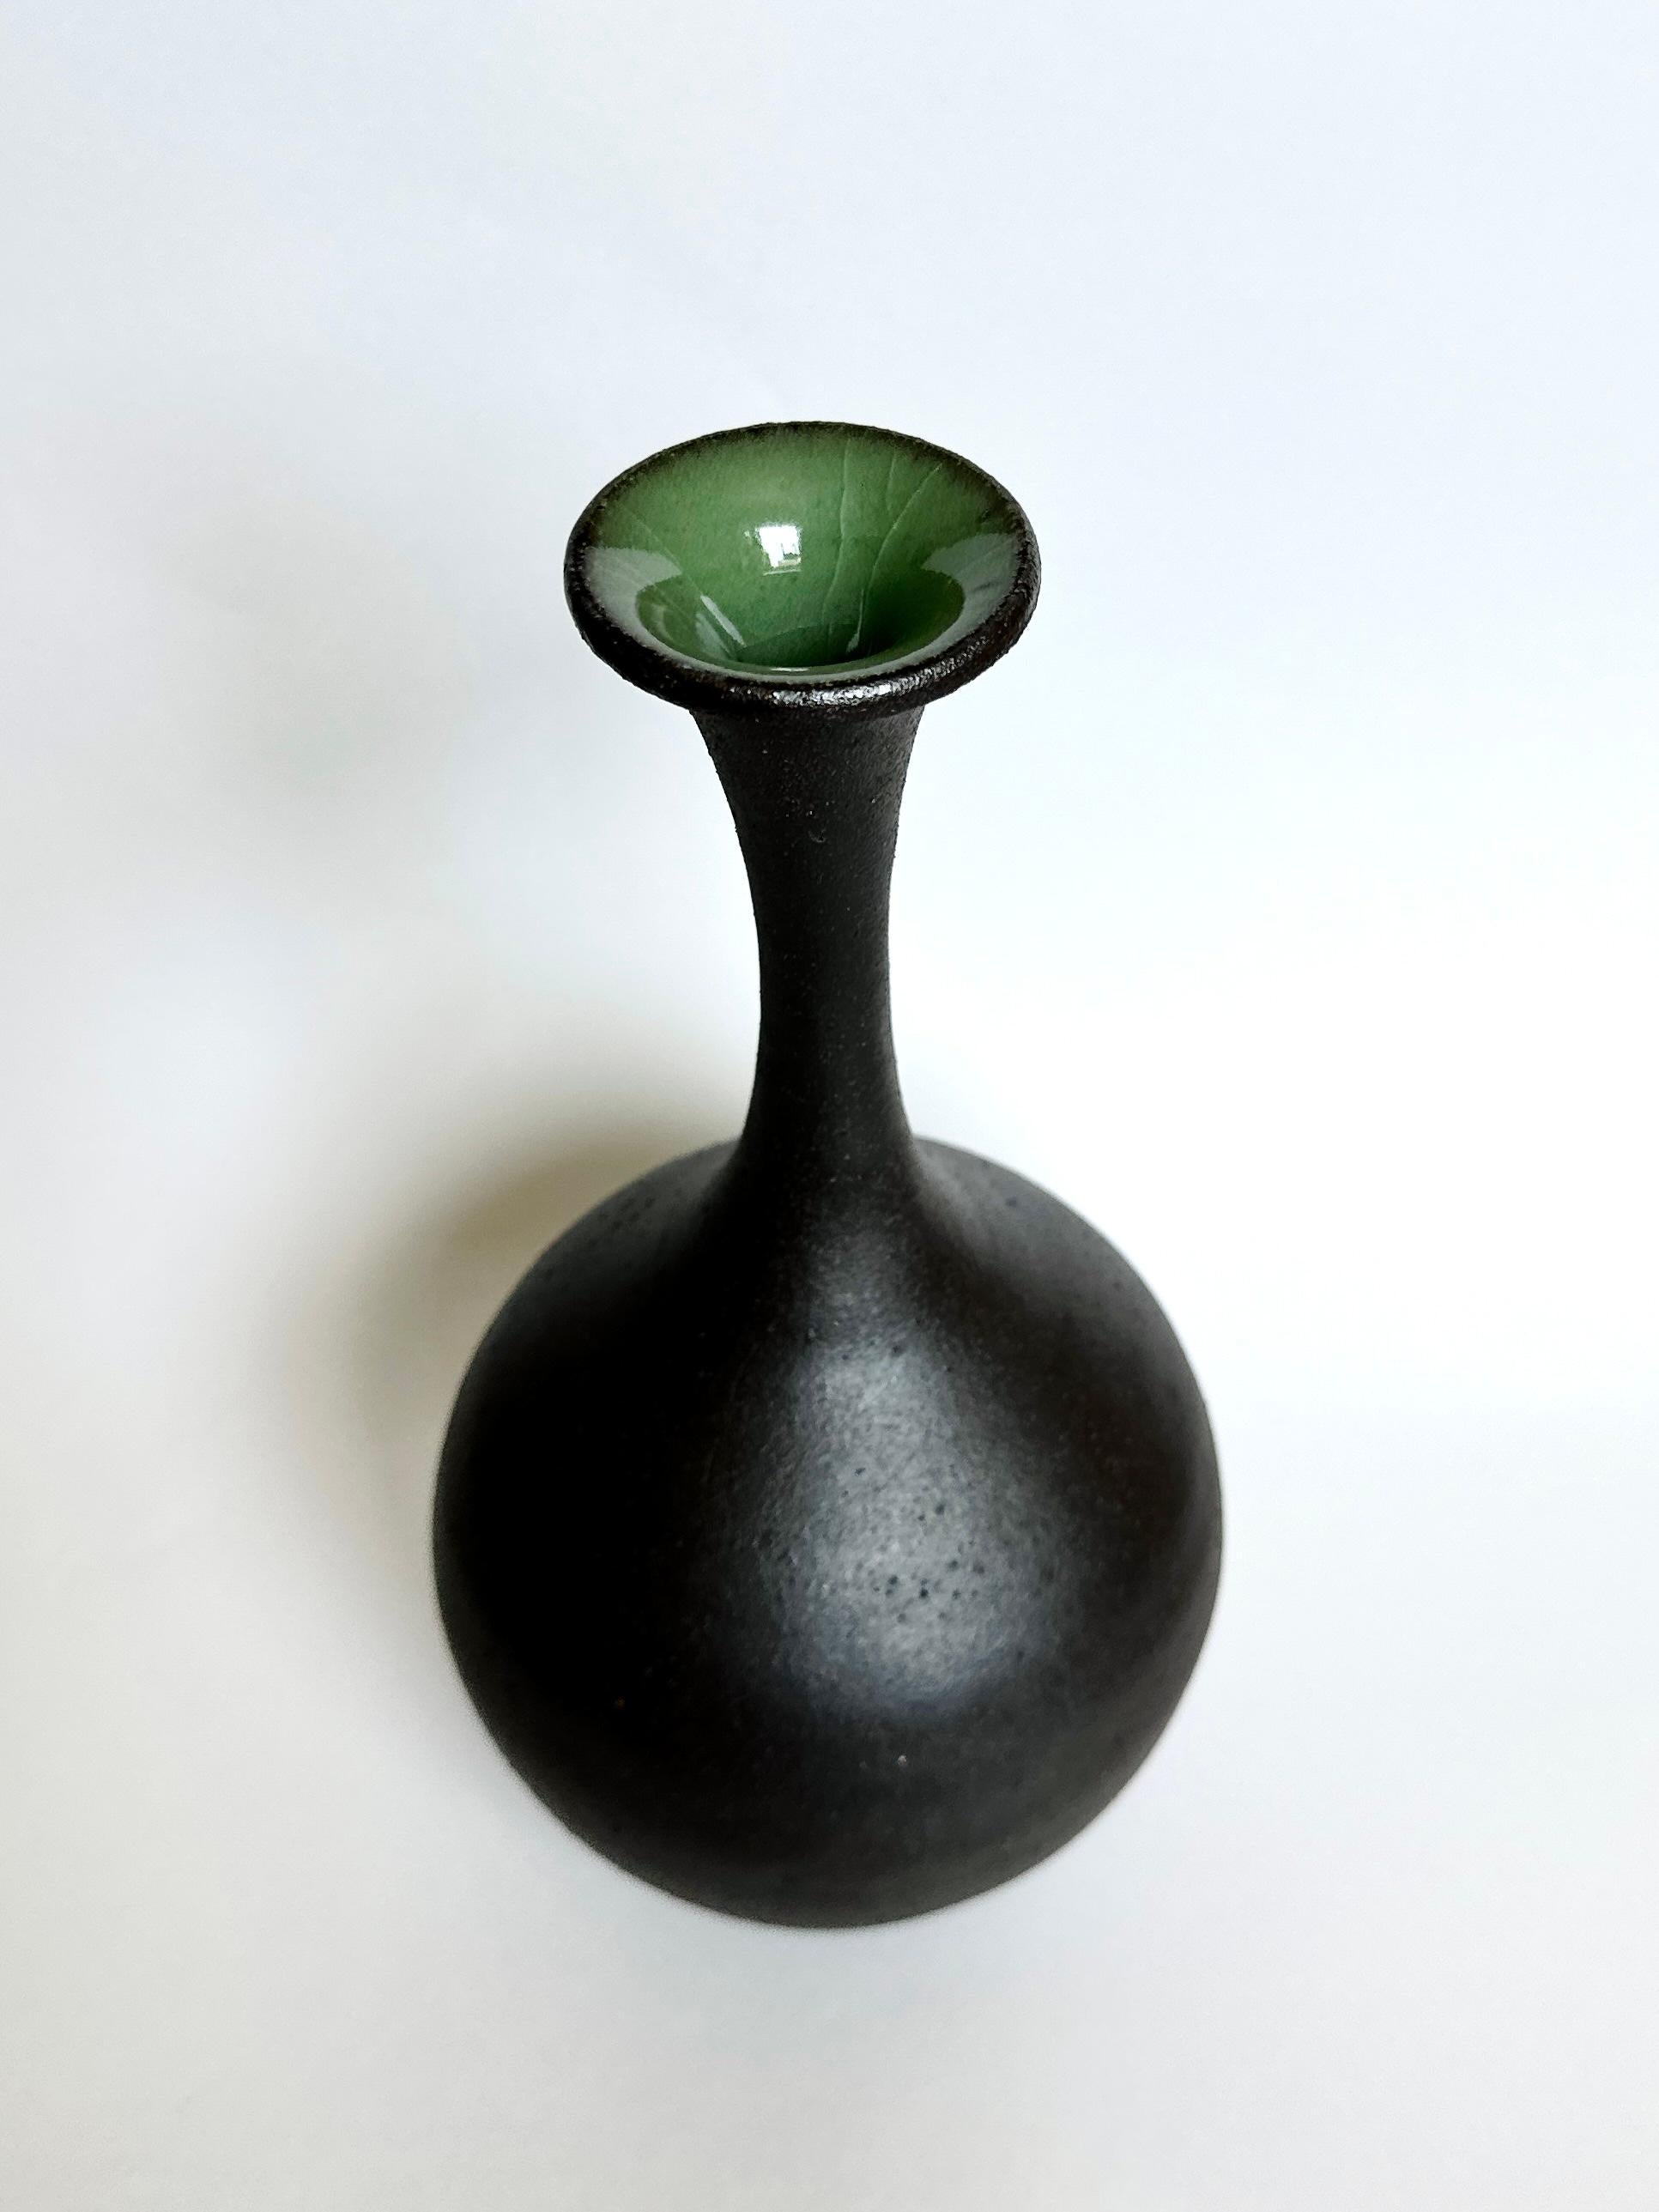 Tall wheel-thrown, hand-built and carved bottleneck vessel made with a rich and beautiful black clay with only the mouth glazed in a green celadon. A personal favorite, in part because it's rather miraculous it made it through the firings with such